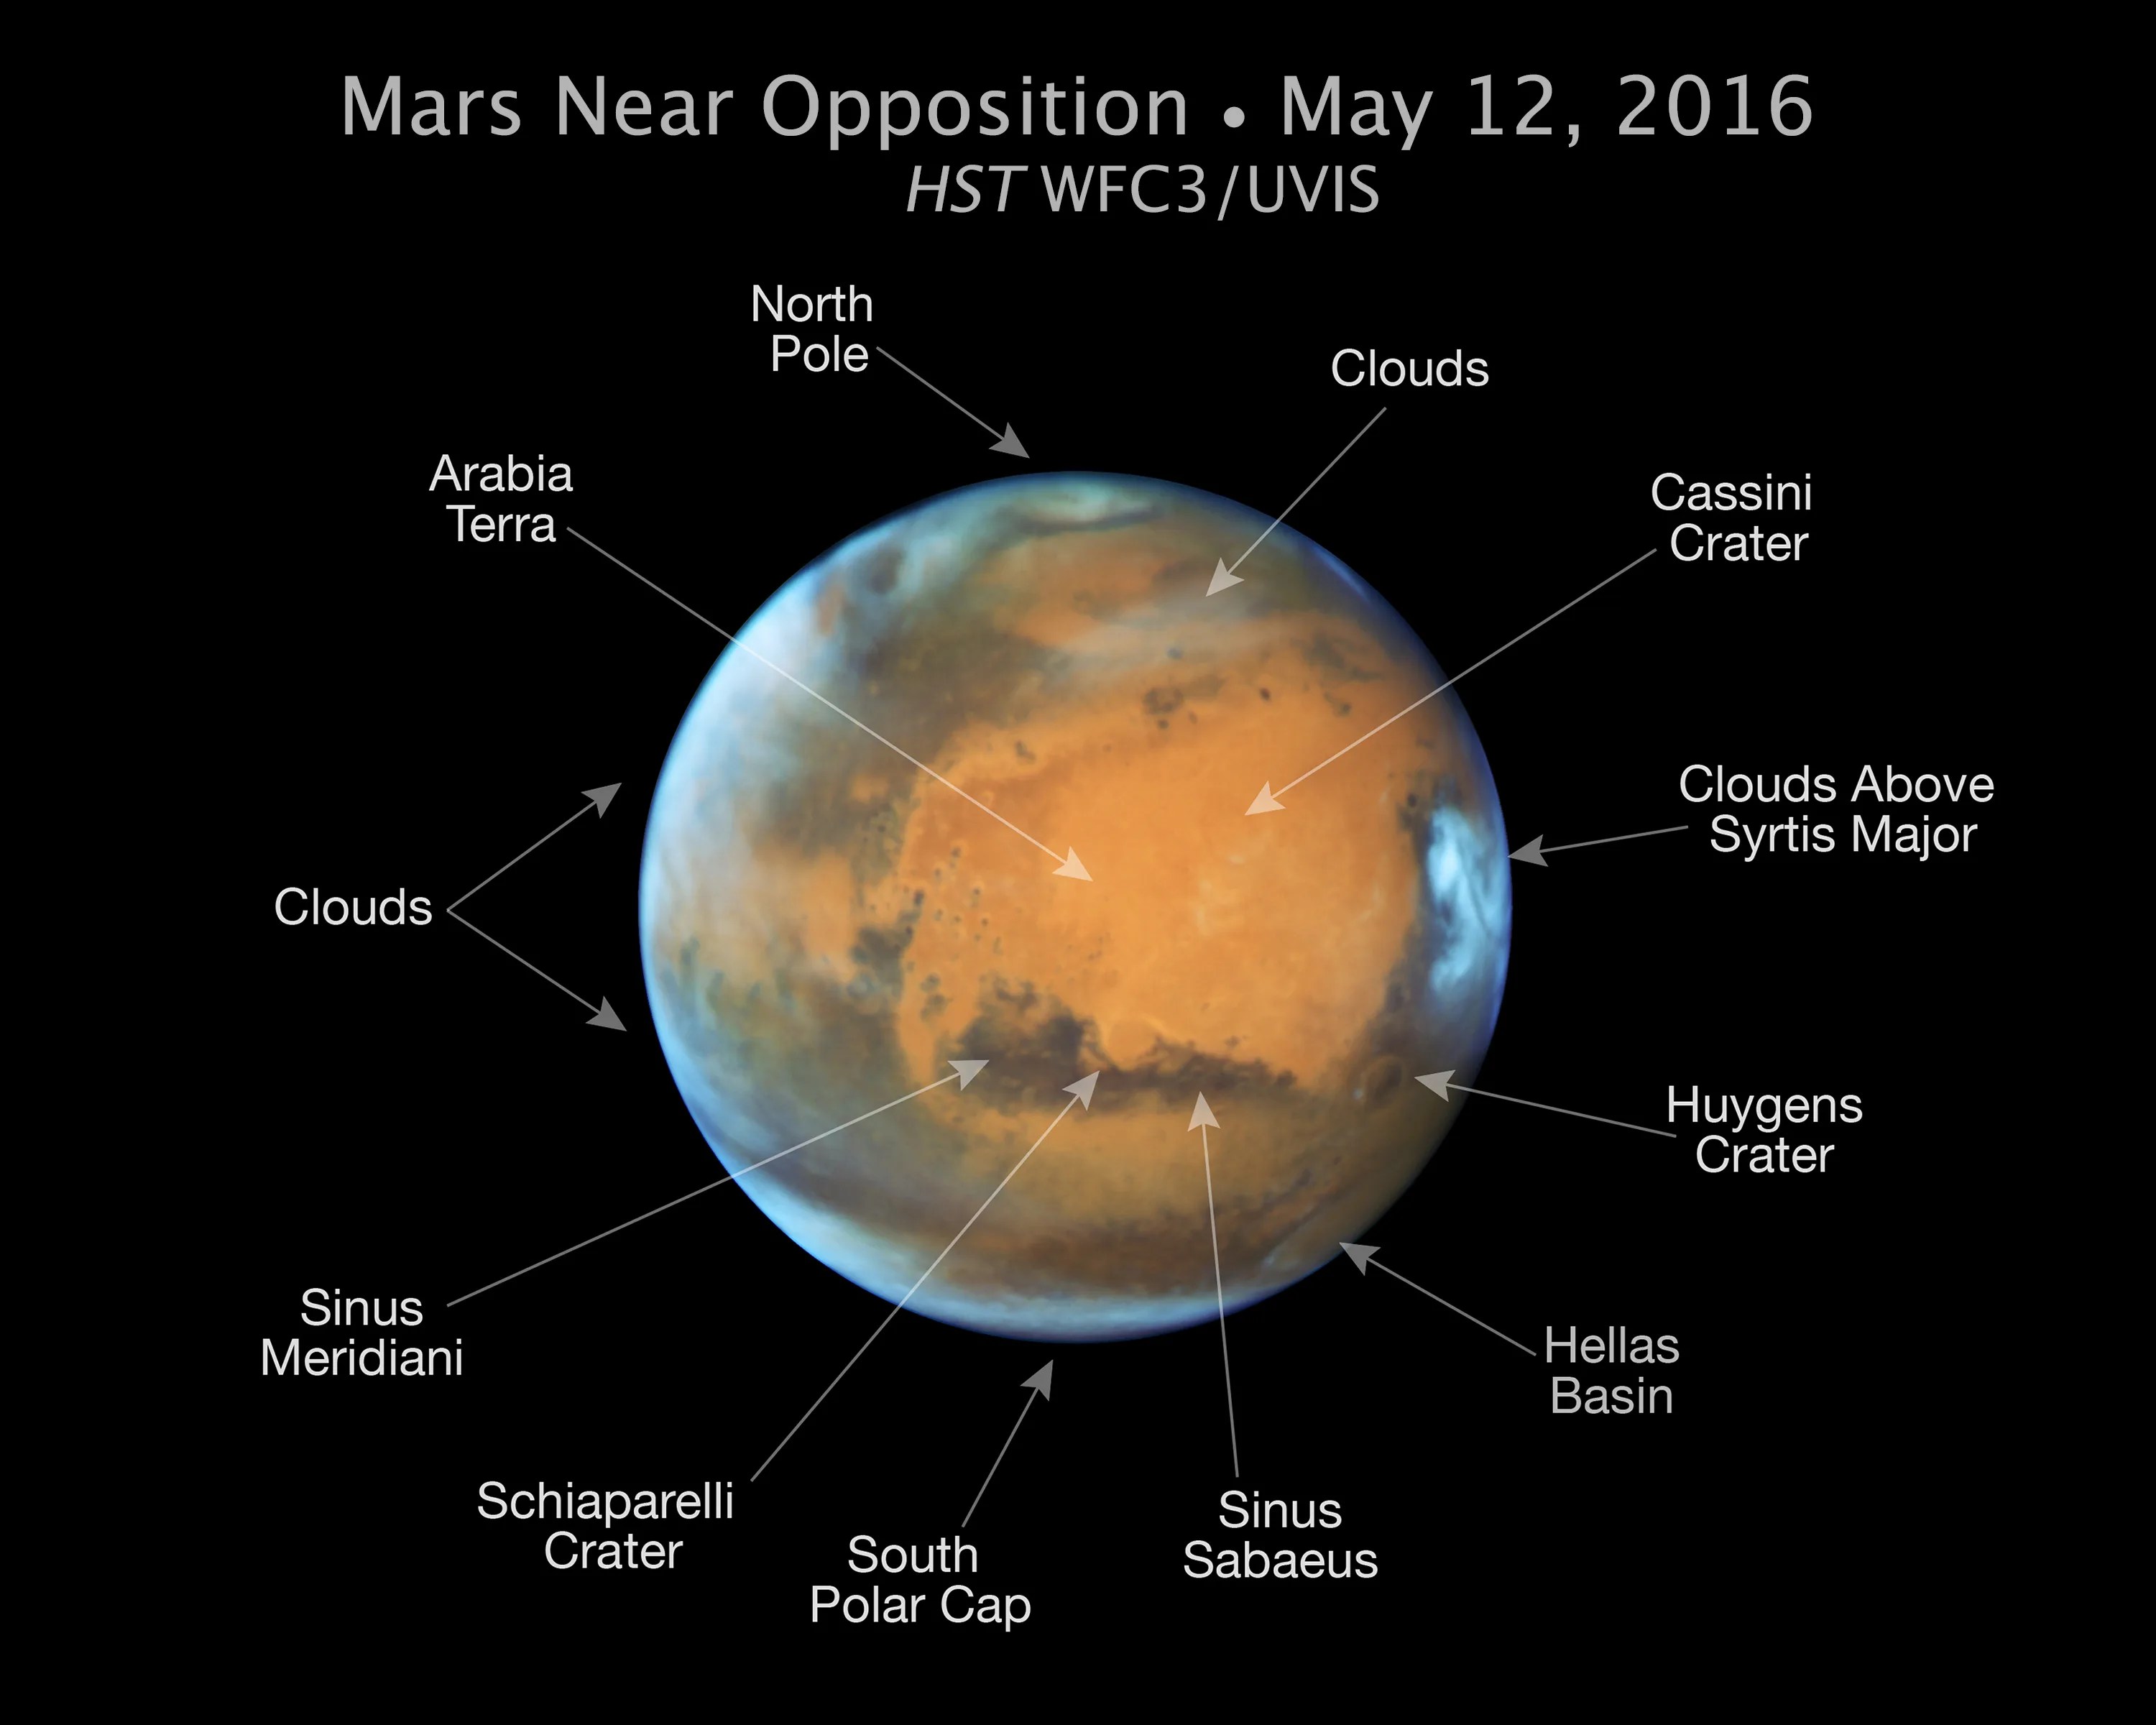 Mars image with major features indicated